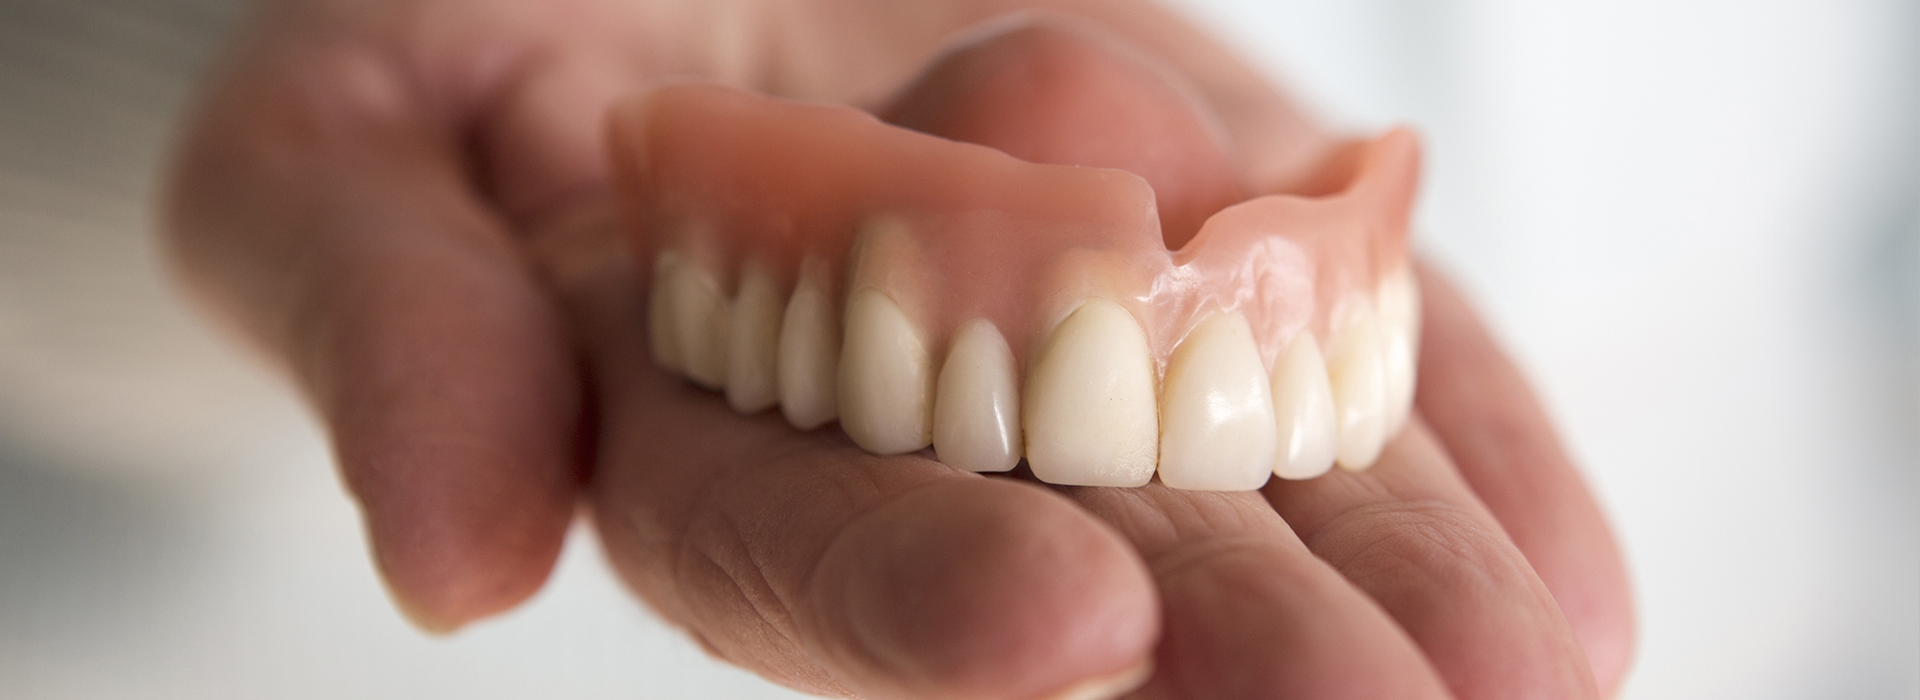 A hand holding a set of dentures against a blurred background.